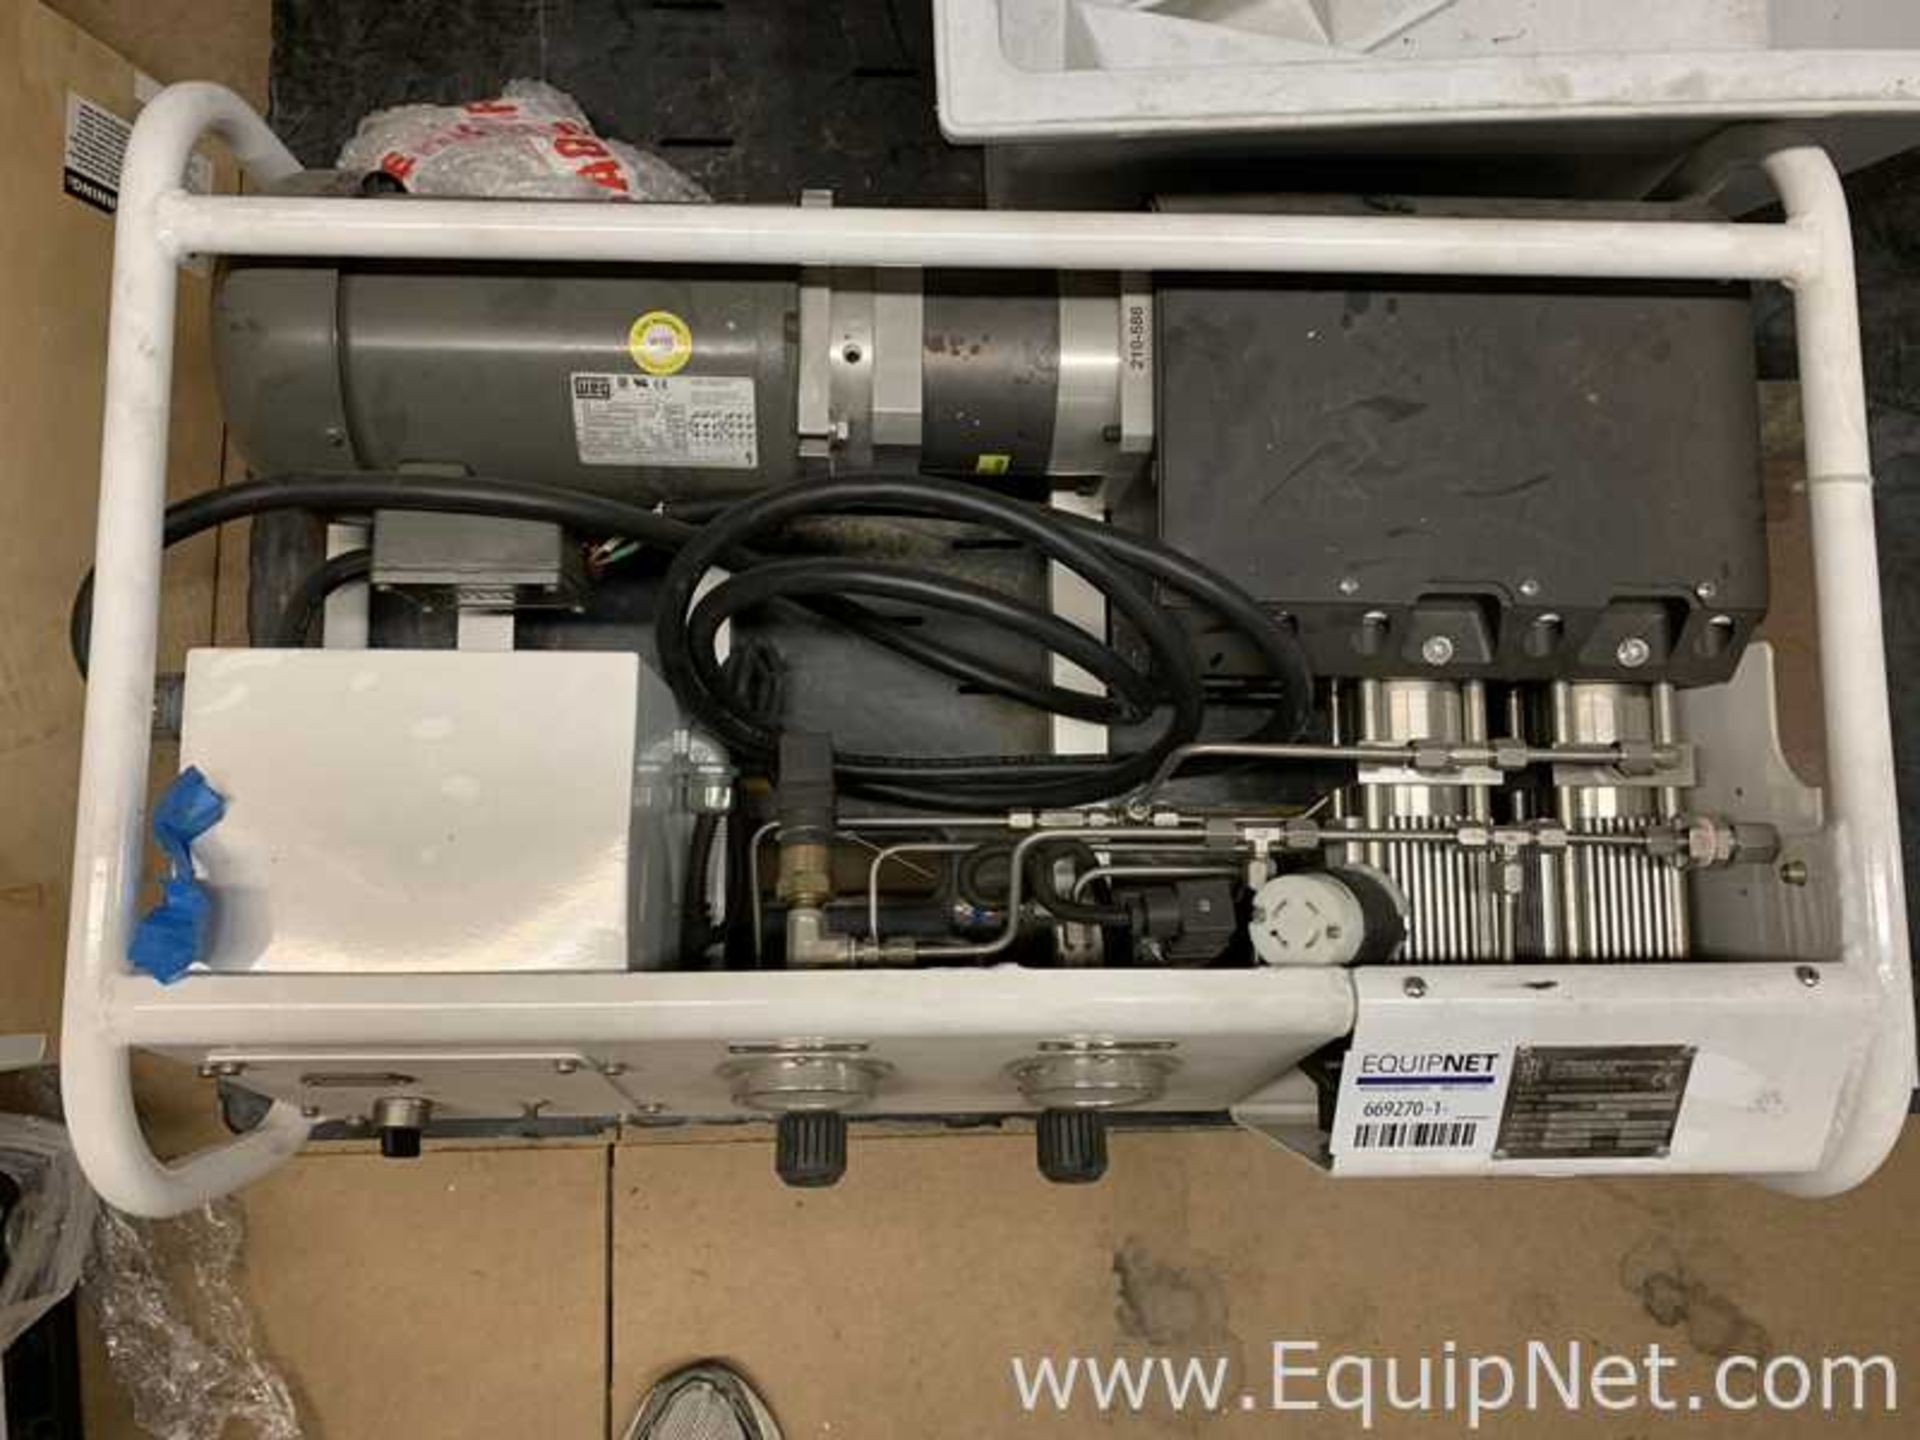 Hydraulics International HIHPG2-21158 Electric Booster System - Image 3 of 6